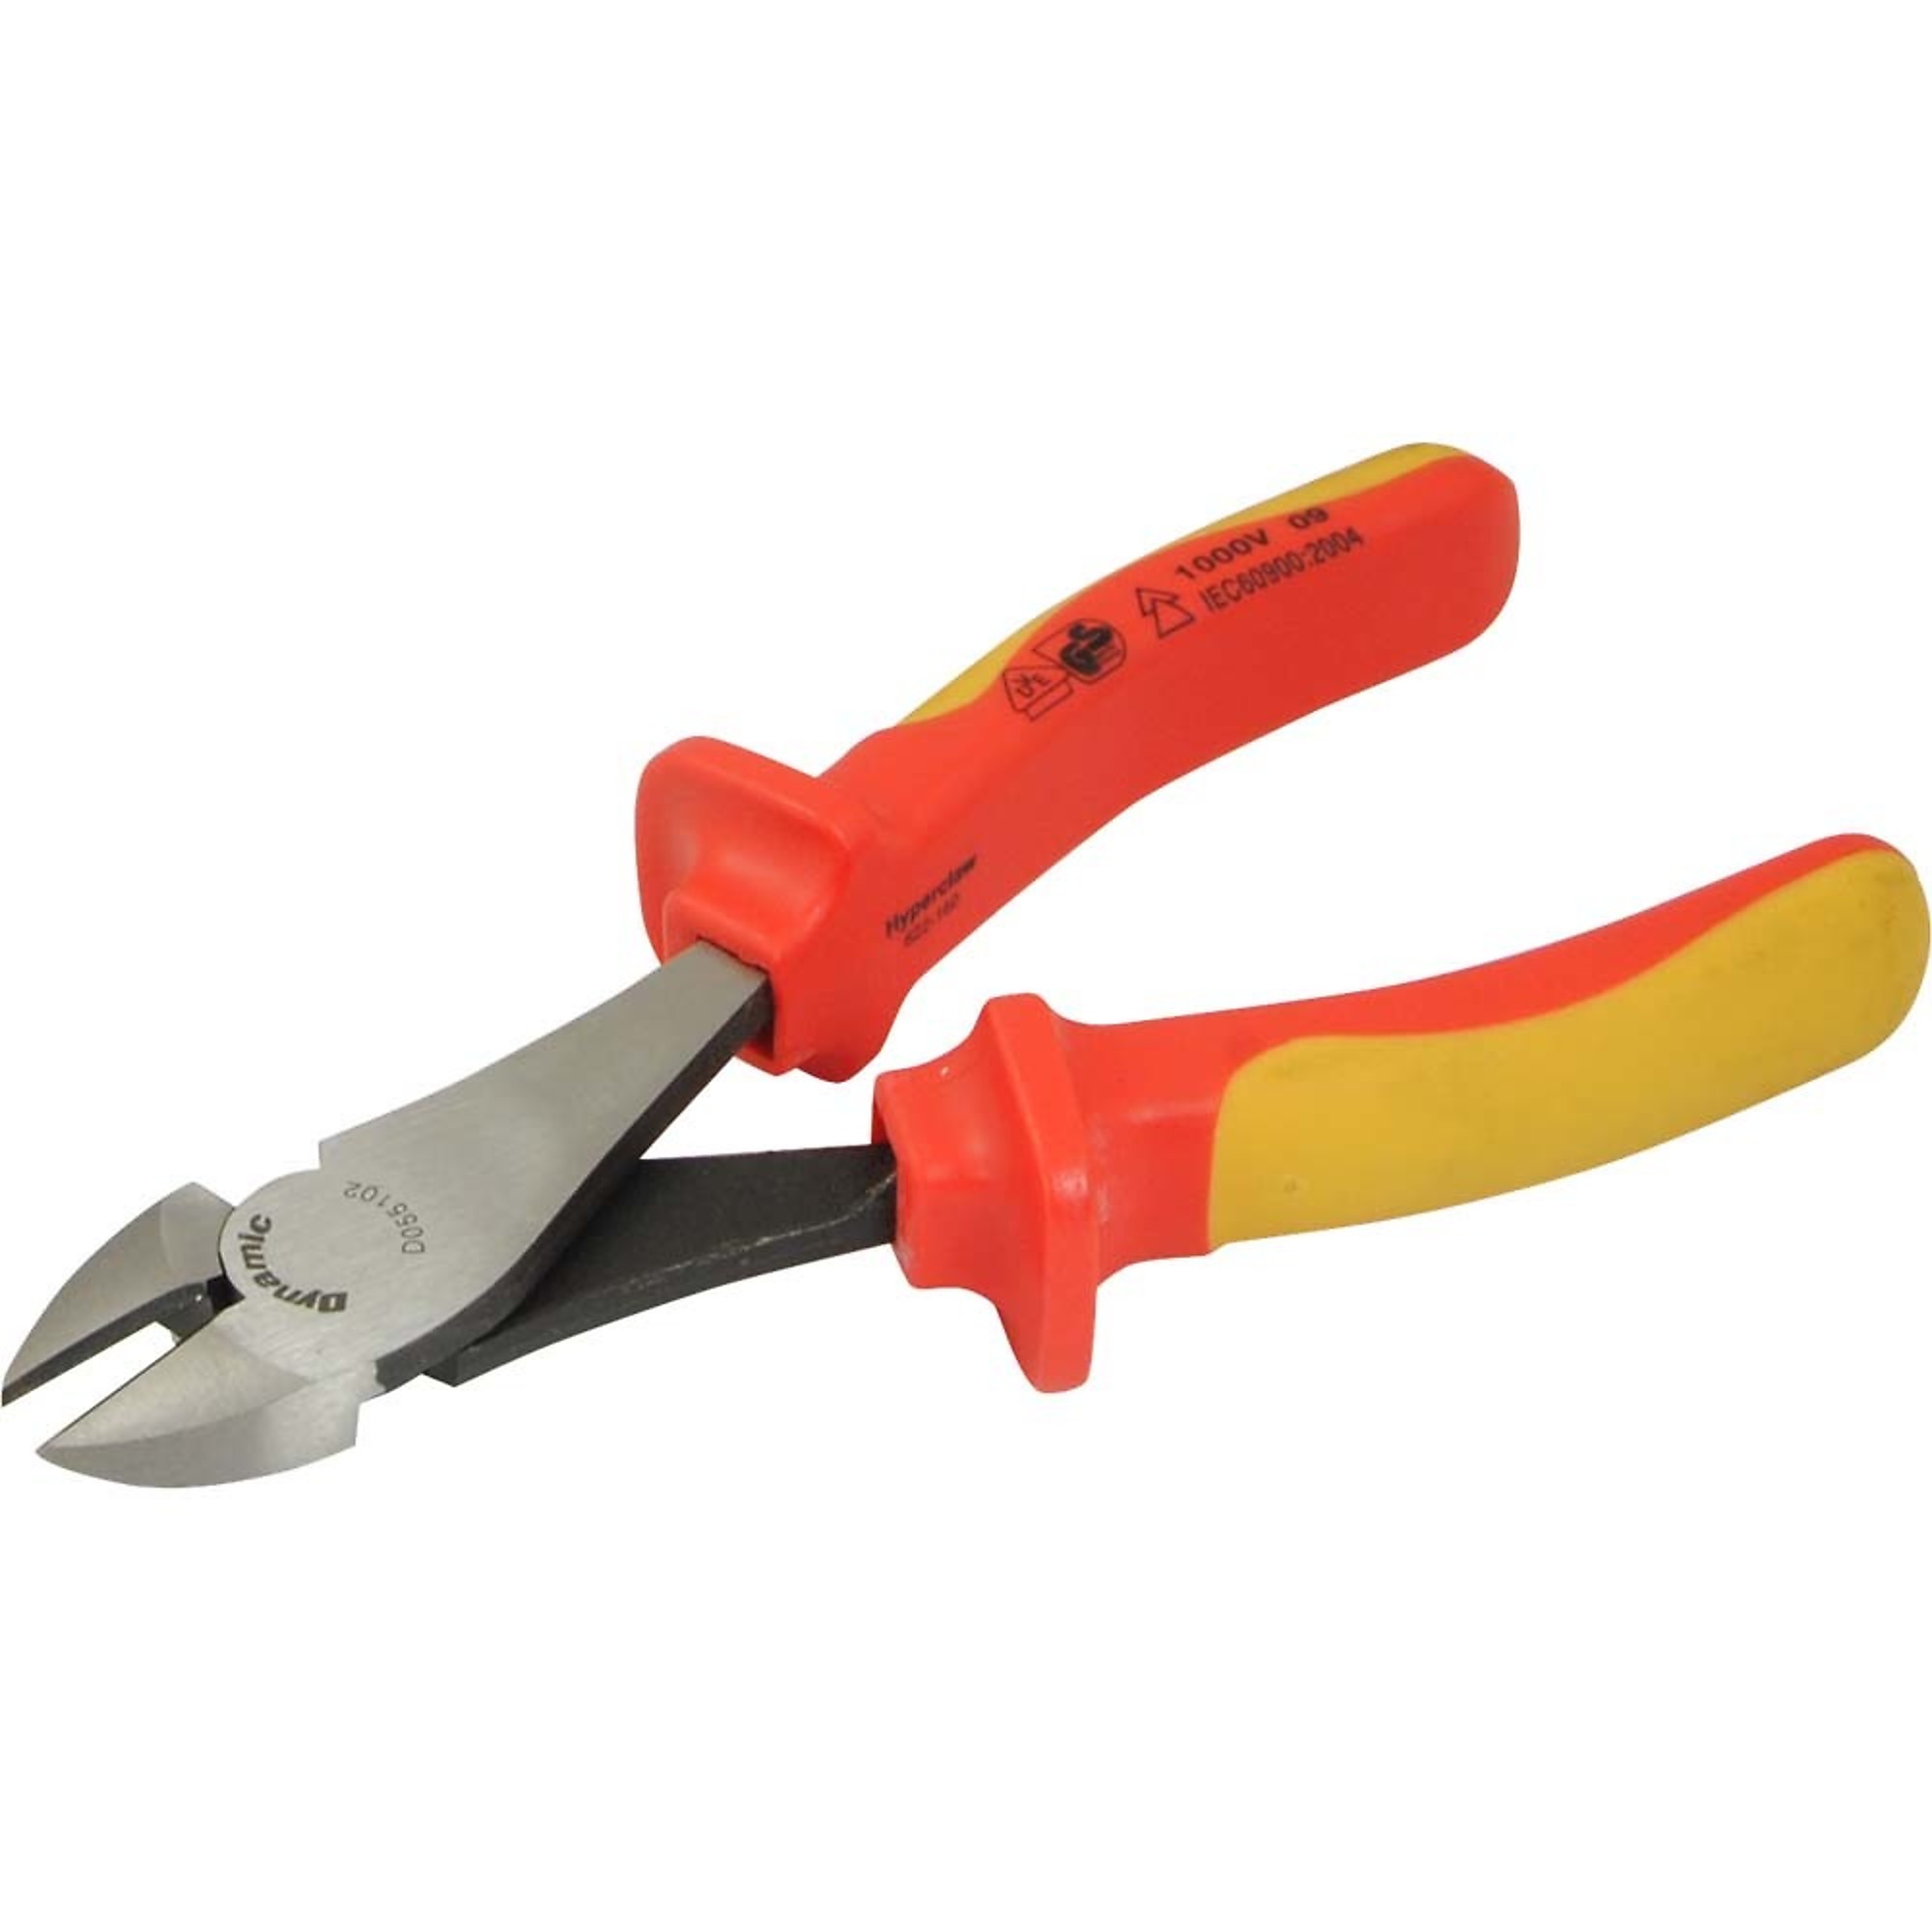 Dynamic Tools, 6Inch Diagonal Cutting Pliers, 1000V Insulated, Blade Size 0.75 in, Tool Length 6 in, Model D055102